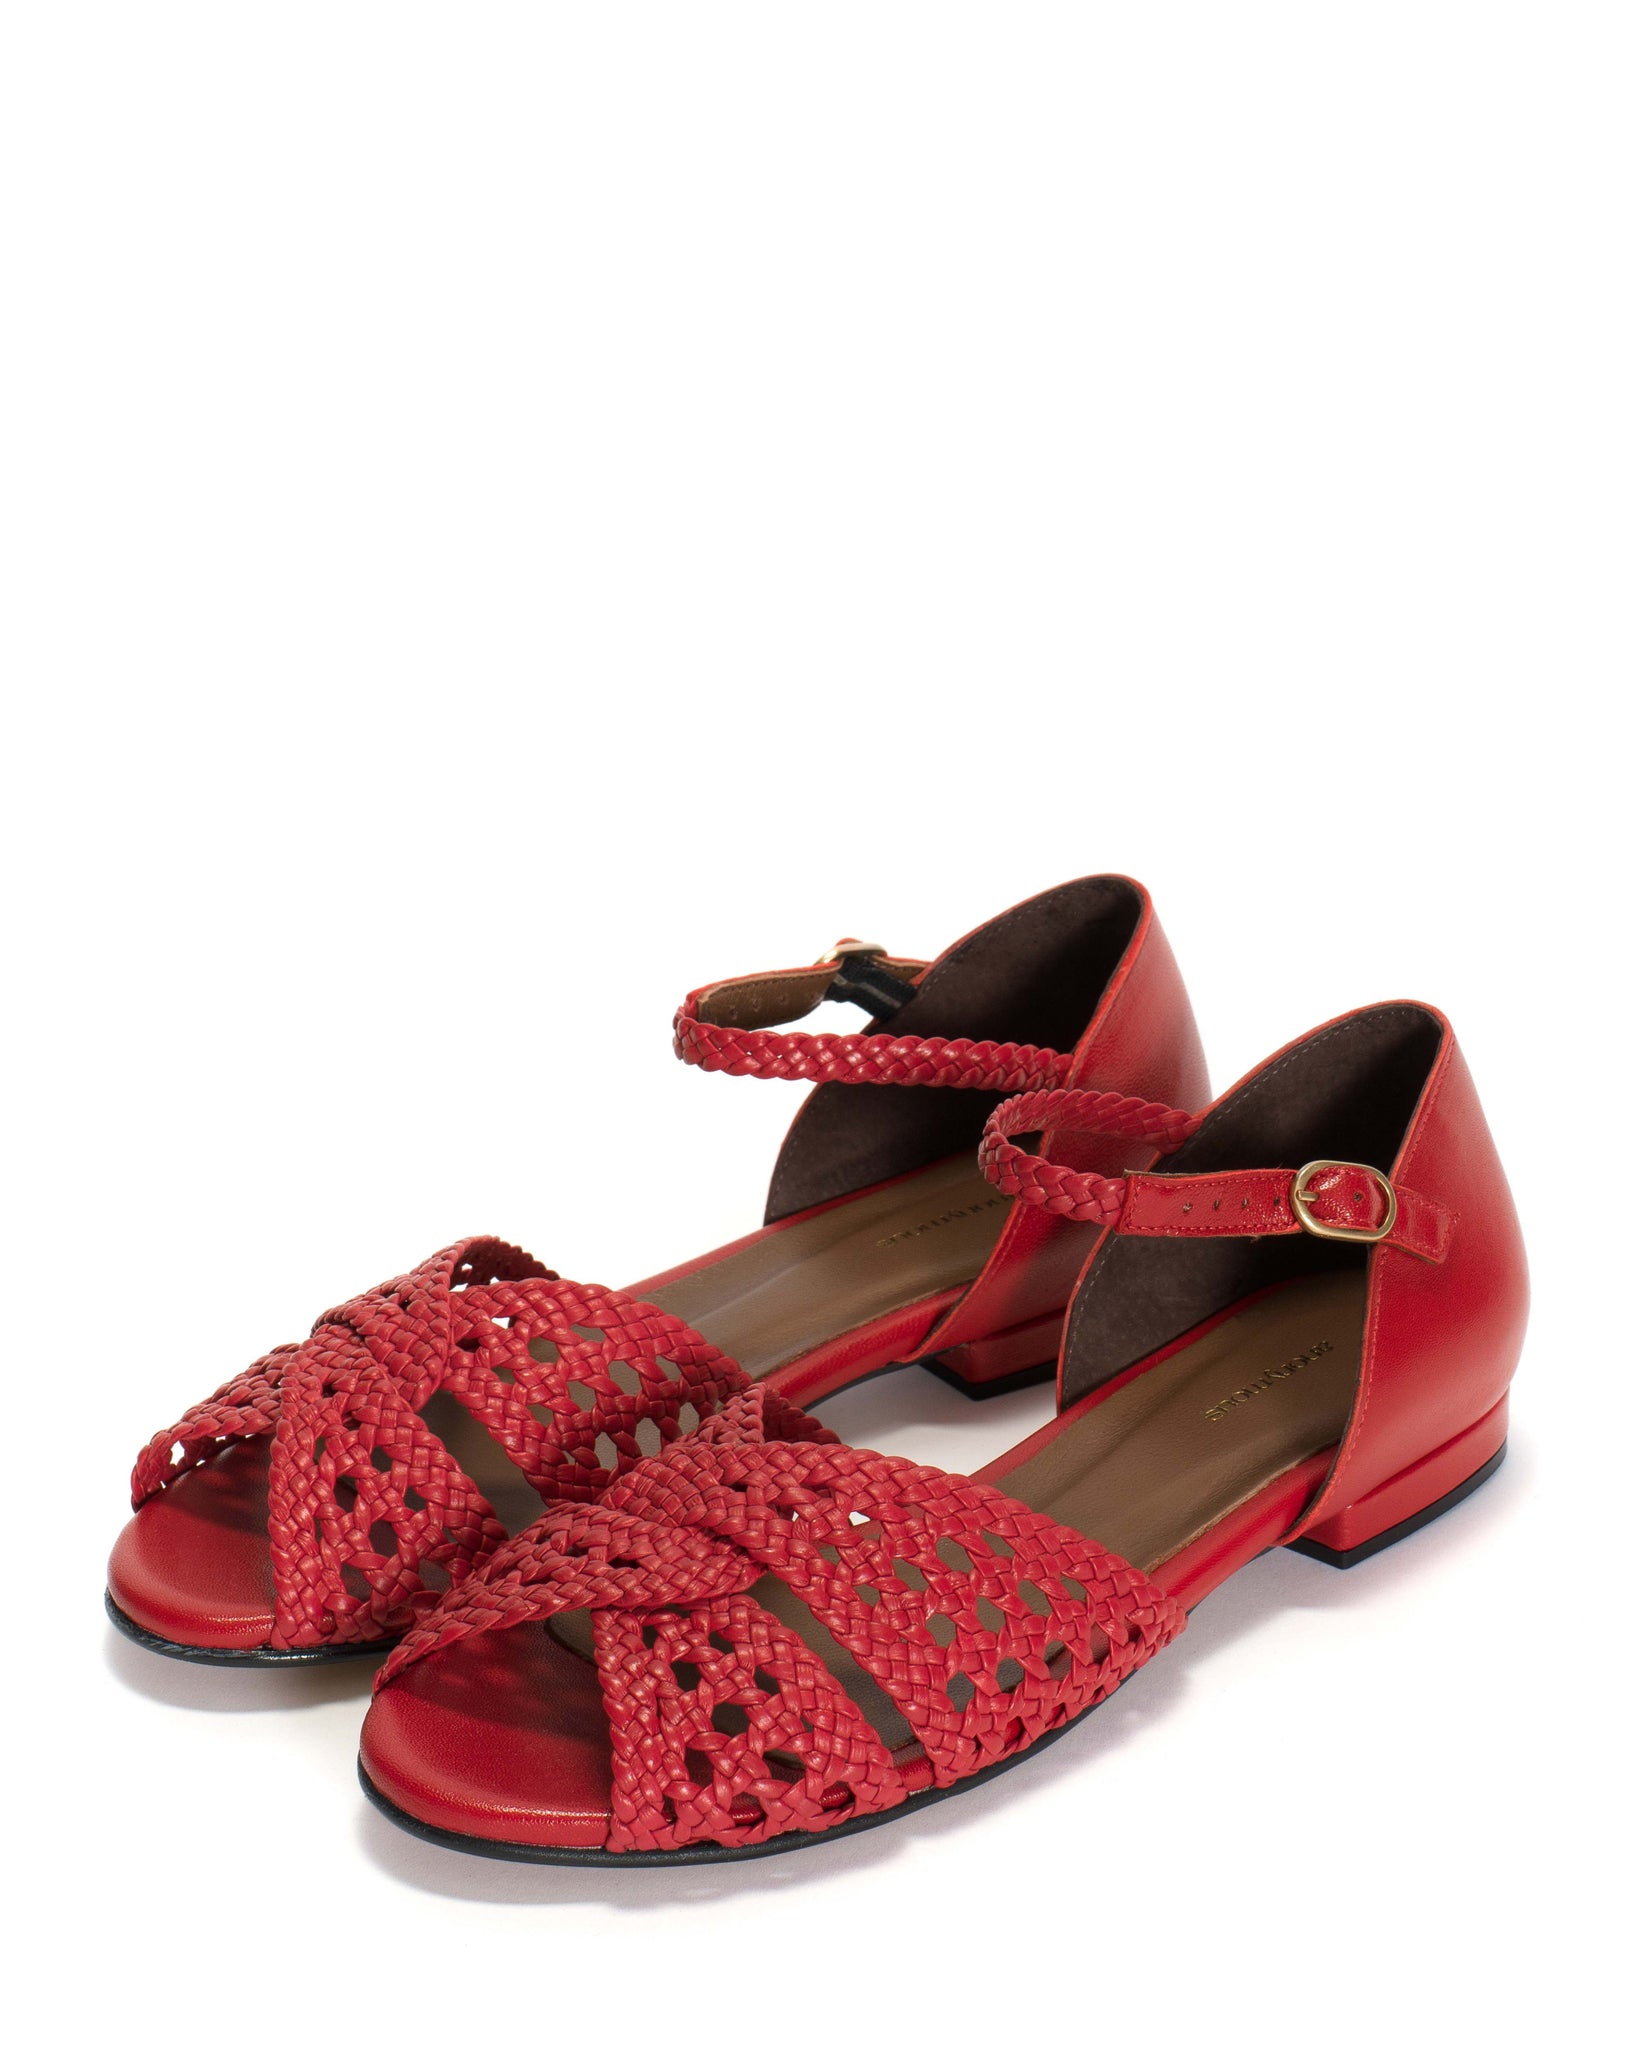 Olina 20 Hand-braided leather Ruby red